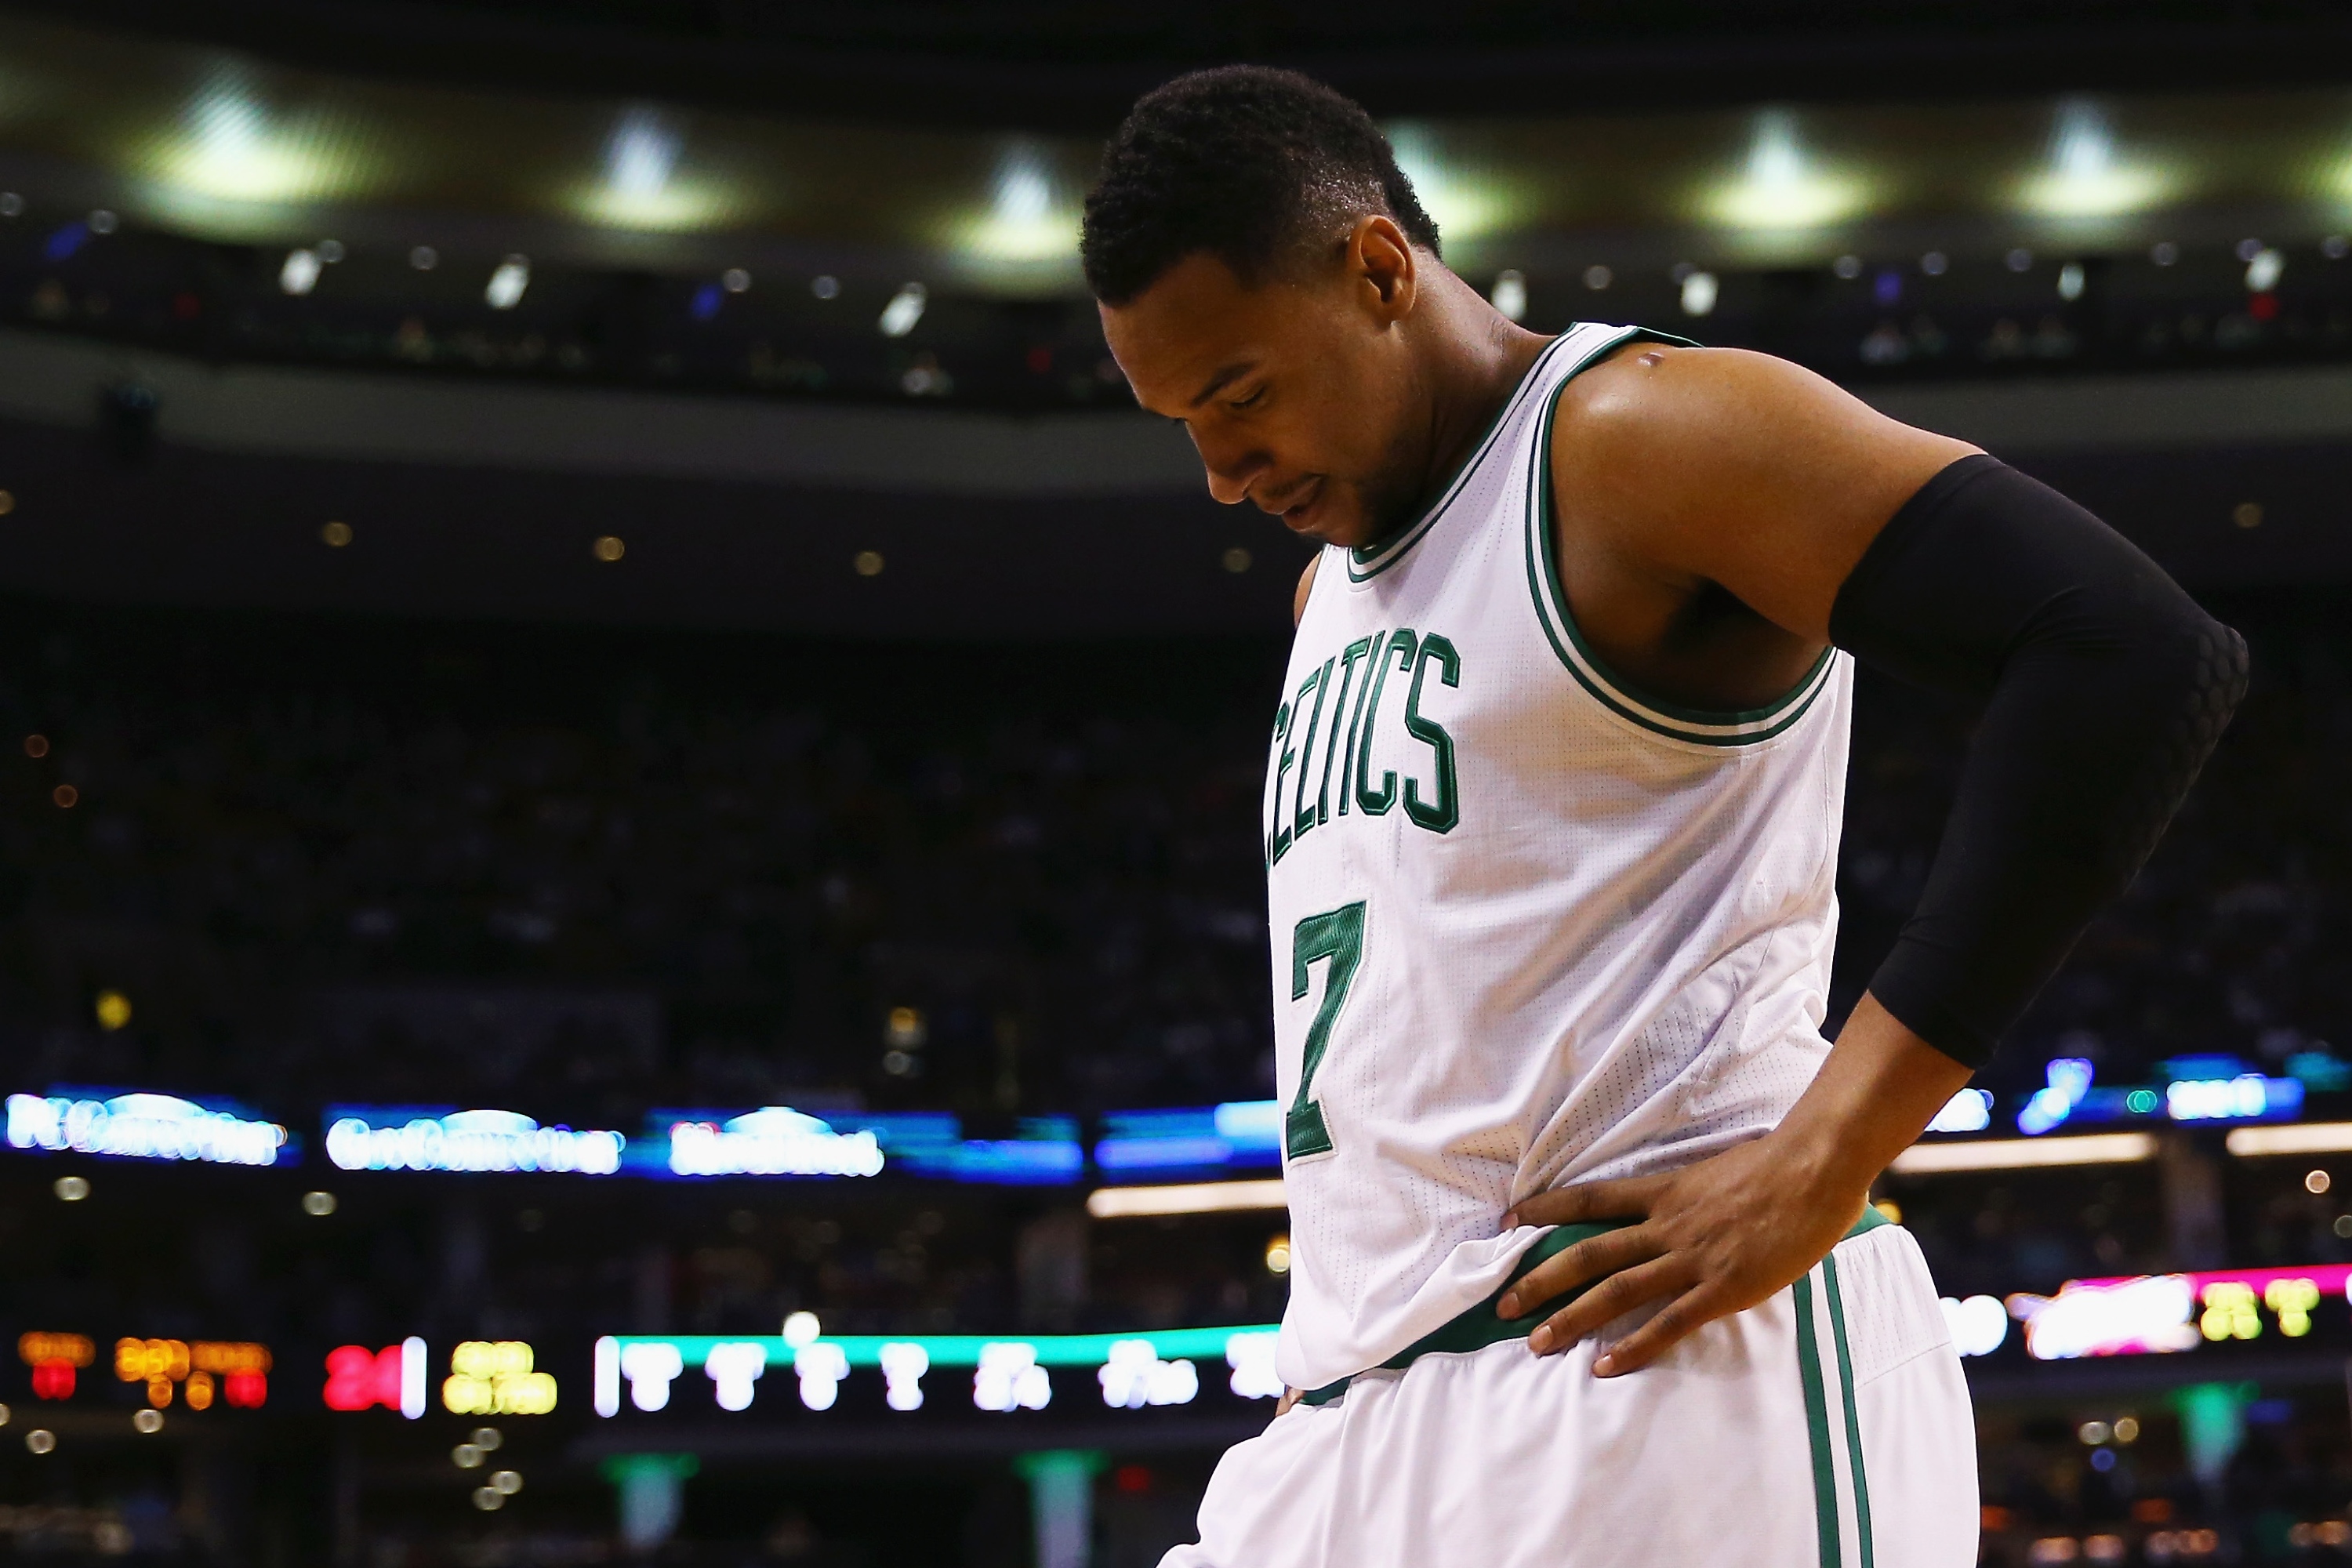 BOSTON, MA - APRIL 23:  Jared Sullinger #7 of the Boston Celtics looks on during the first quarter against the Cleveland Cavaliers in the first round of the 2015 NBA Playoffs at TD Garden on April 23, 2015 in Boston, Massachusetts. NOTE TO USER: User expressly acknowledges and agrees that, by downloading and/or using this photograph, user is consenting to the terms and conditions of the Getty Images License Agreement.  (Photo by Maddie Meyer/Getty Images)